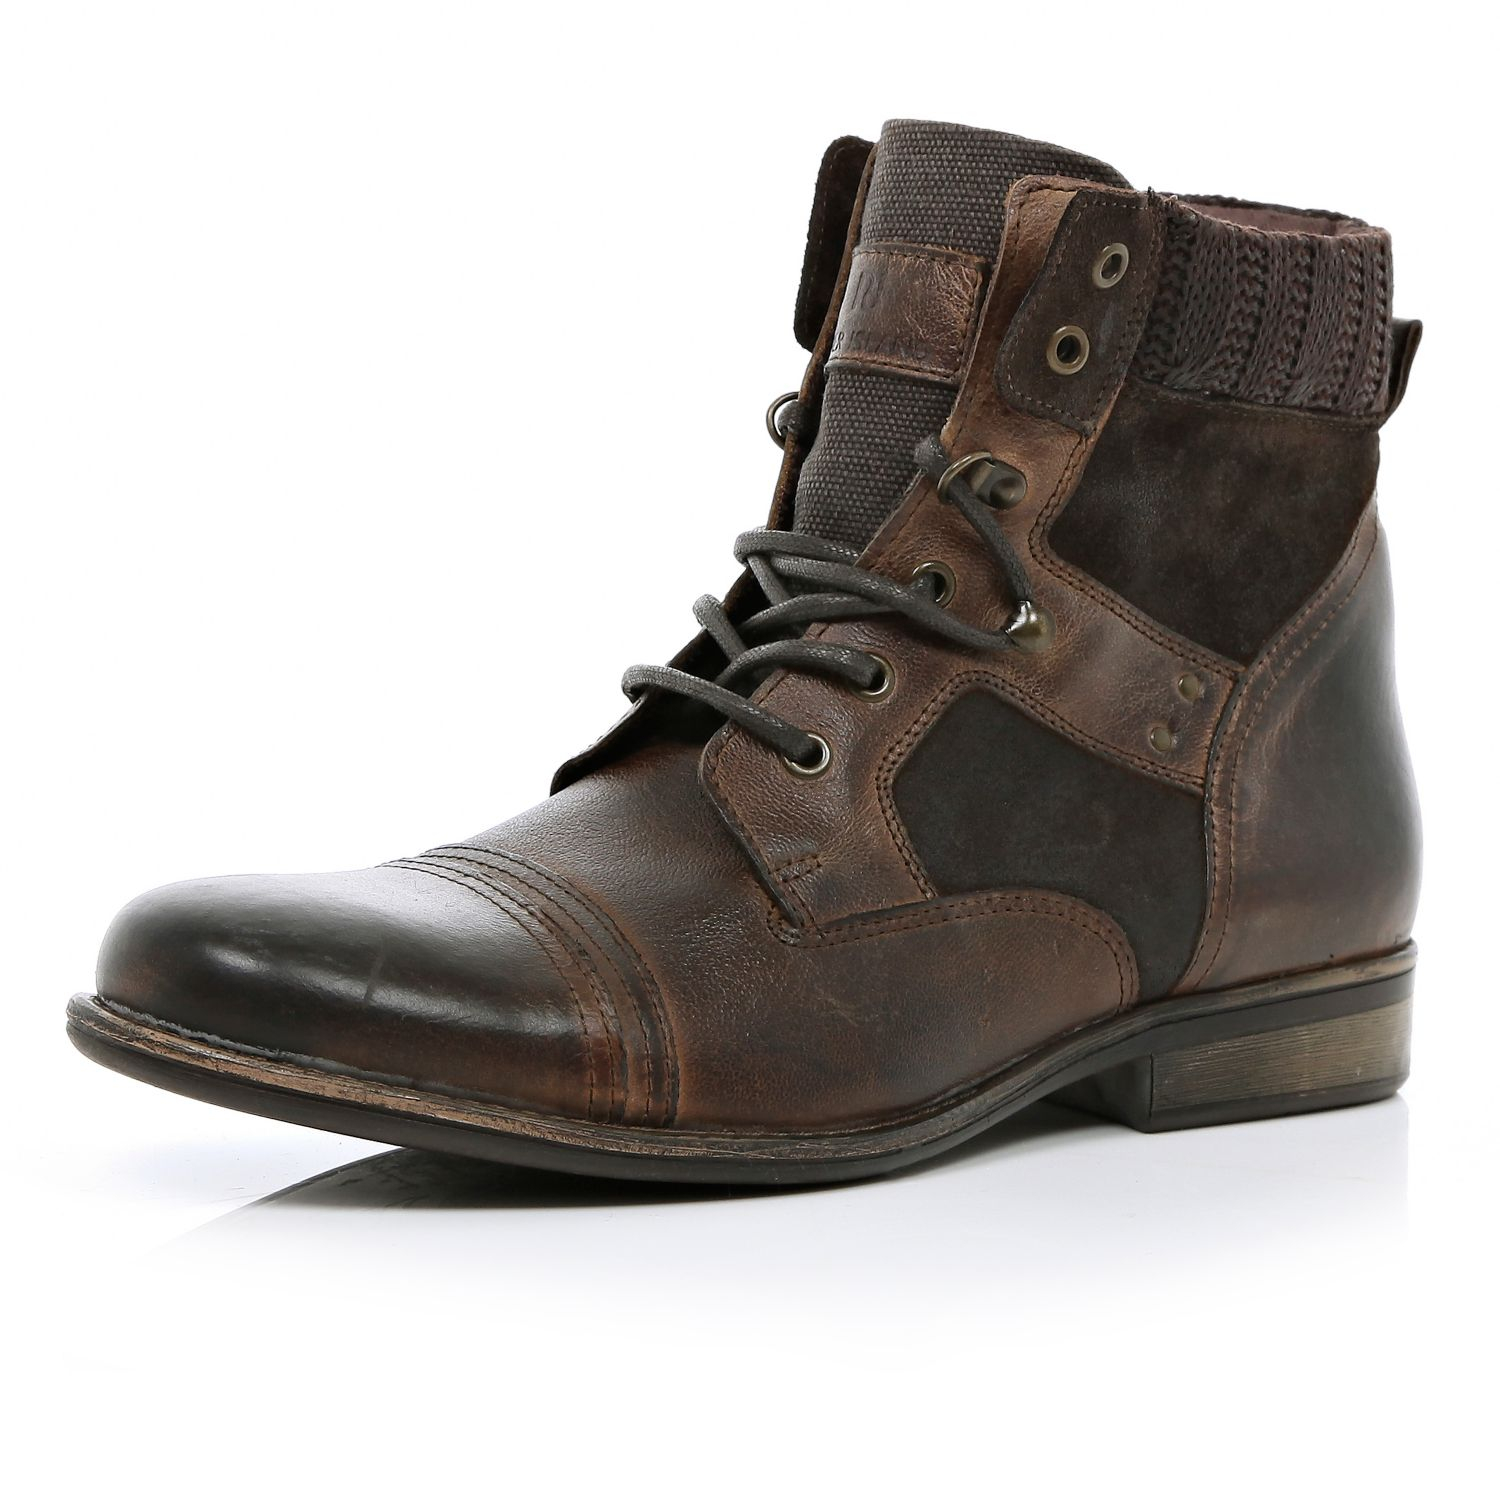 Lyst - River Island Dark Brown Contrast Panel Military Boots in Brown ...